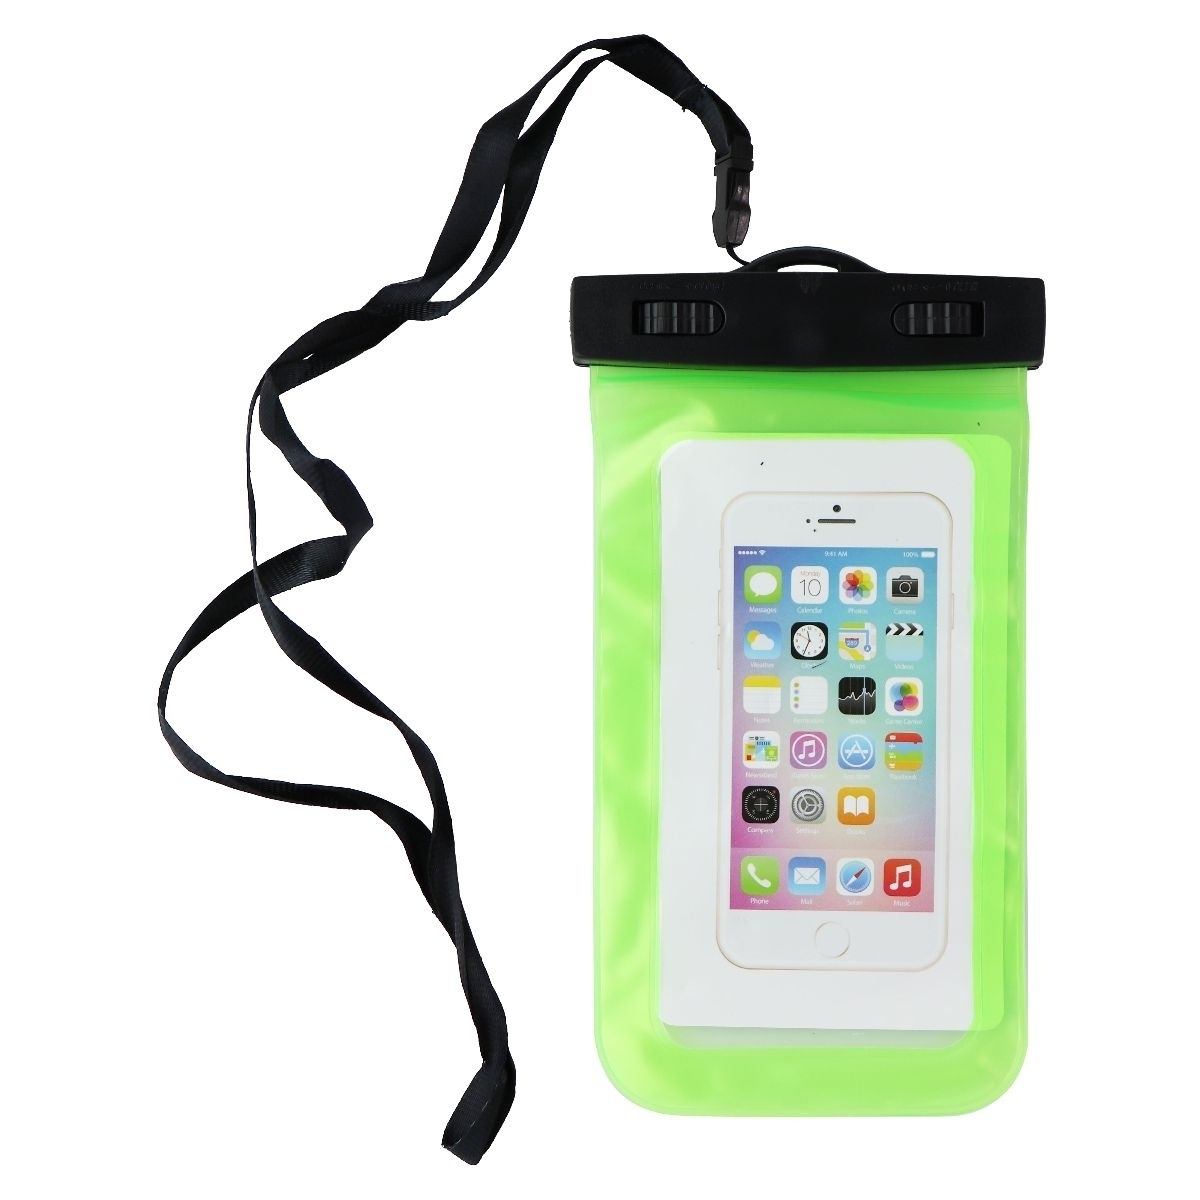 Universal Water Resistant Pouch For Smartphones With Carrying Cord - Green